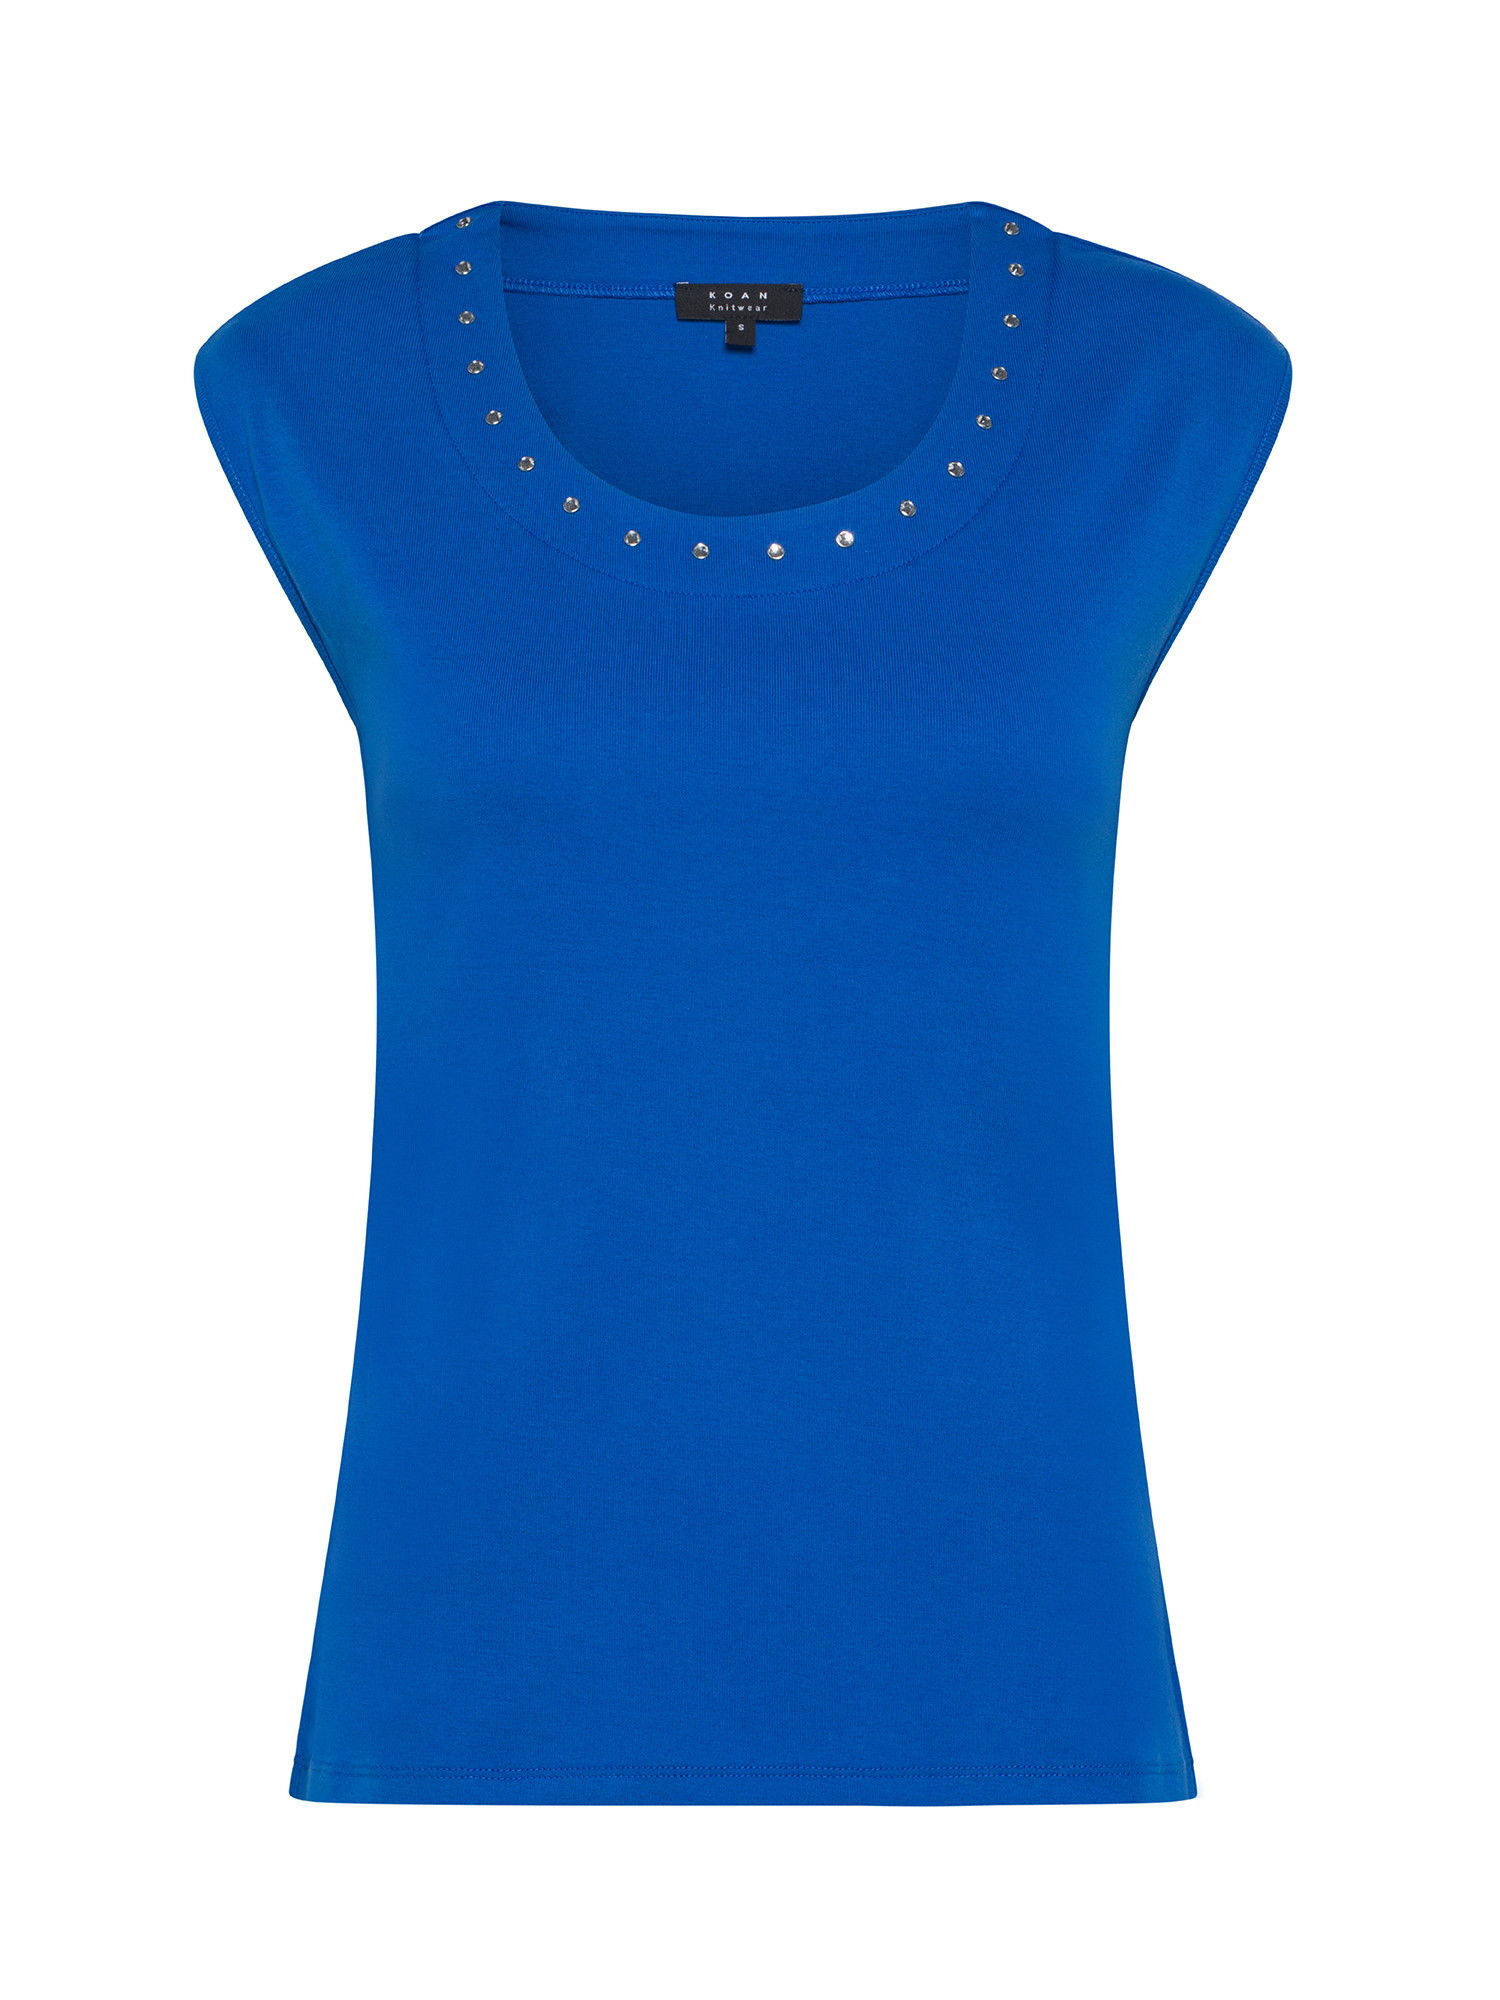 Koan - Cotton T-shirt with studs, Royal Blue, large image number 0